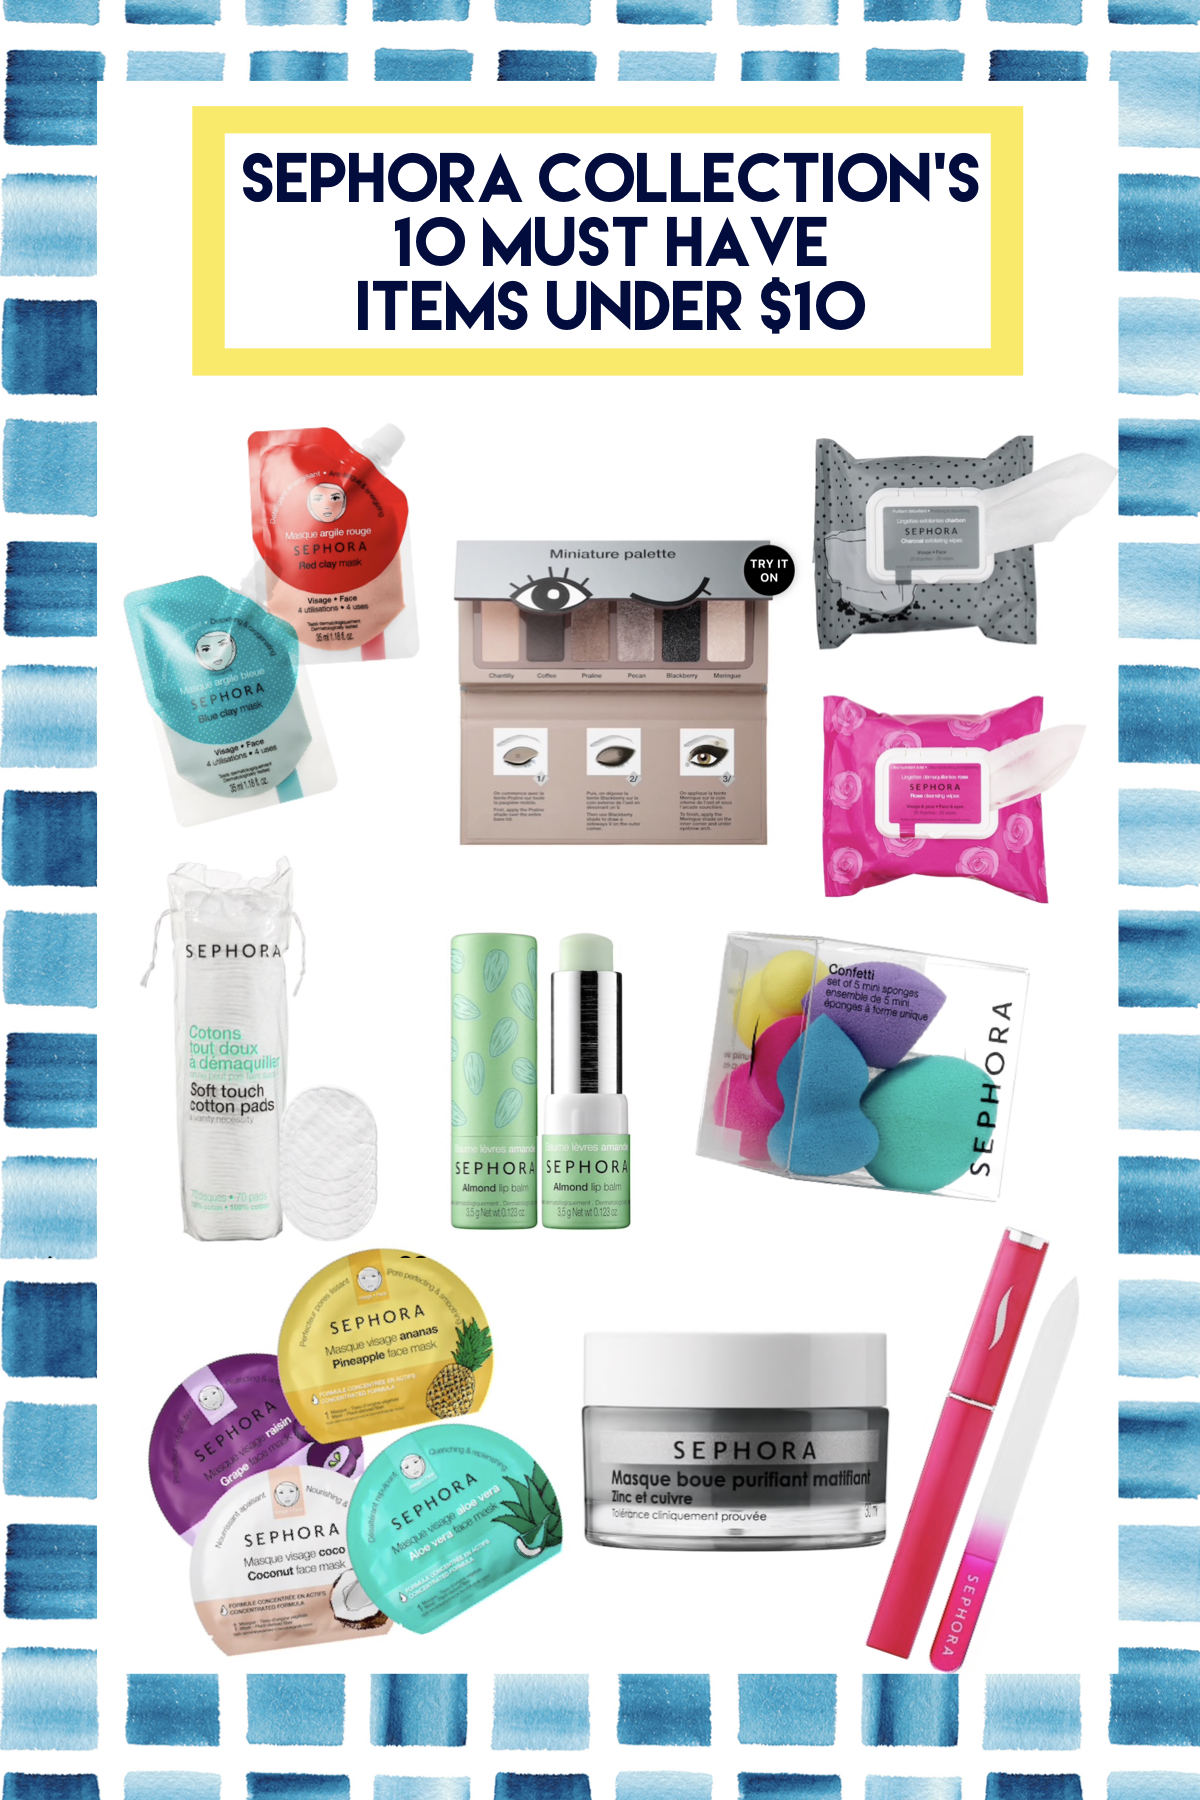 10 Must Have Items by Sephora Collection for Under $10